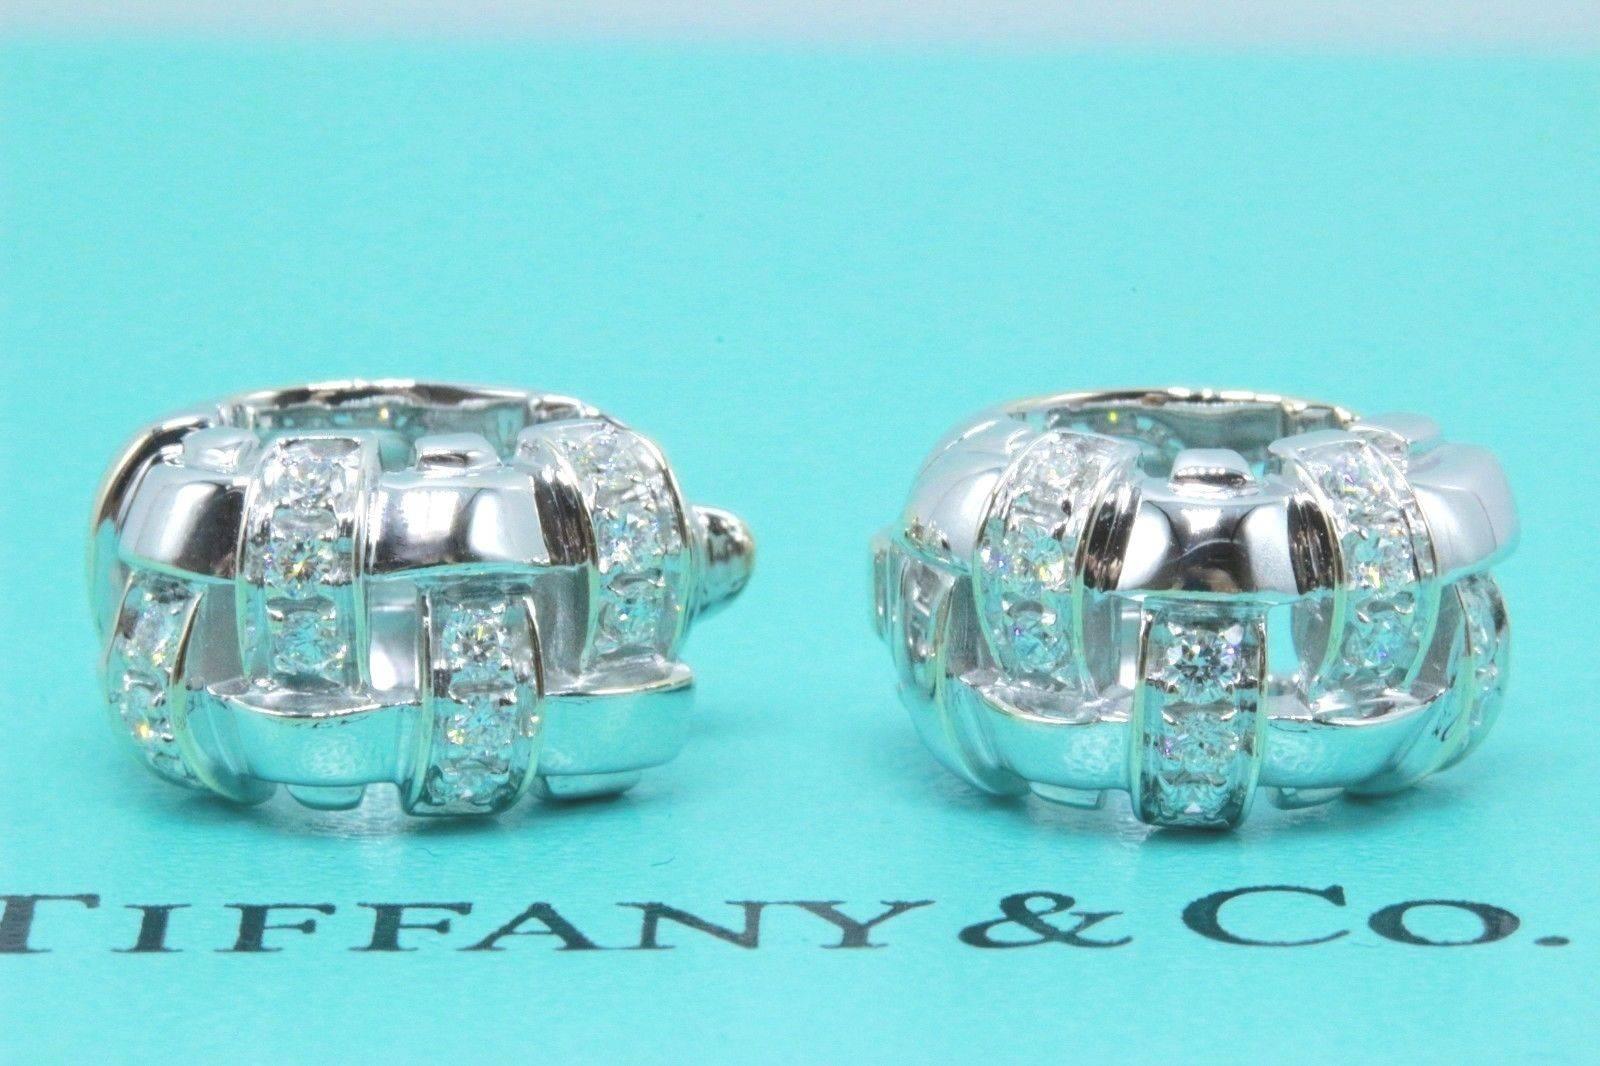 Tiffany & Co. Vannerie Basket Weave Diamond Earrings 18 Karat White Gold In Excellent Condition For Sale In San Diego, CA